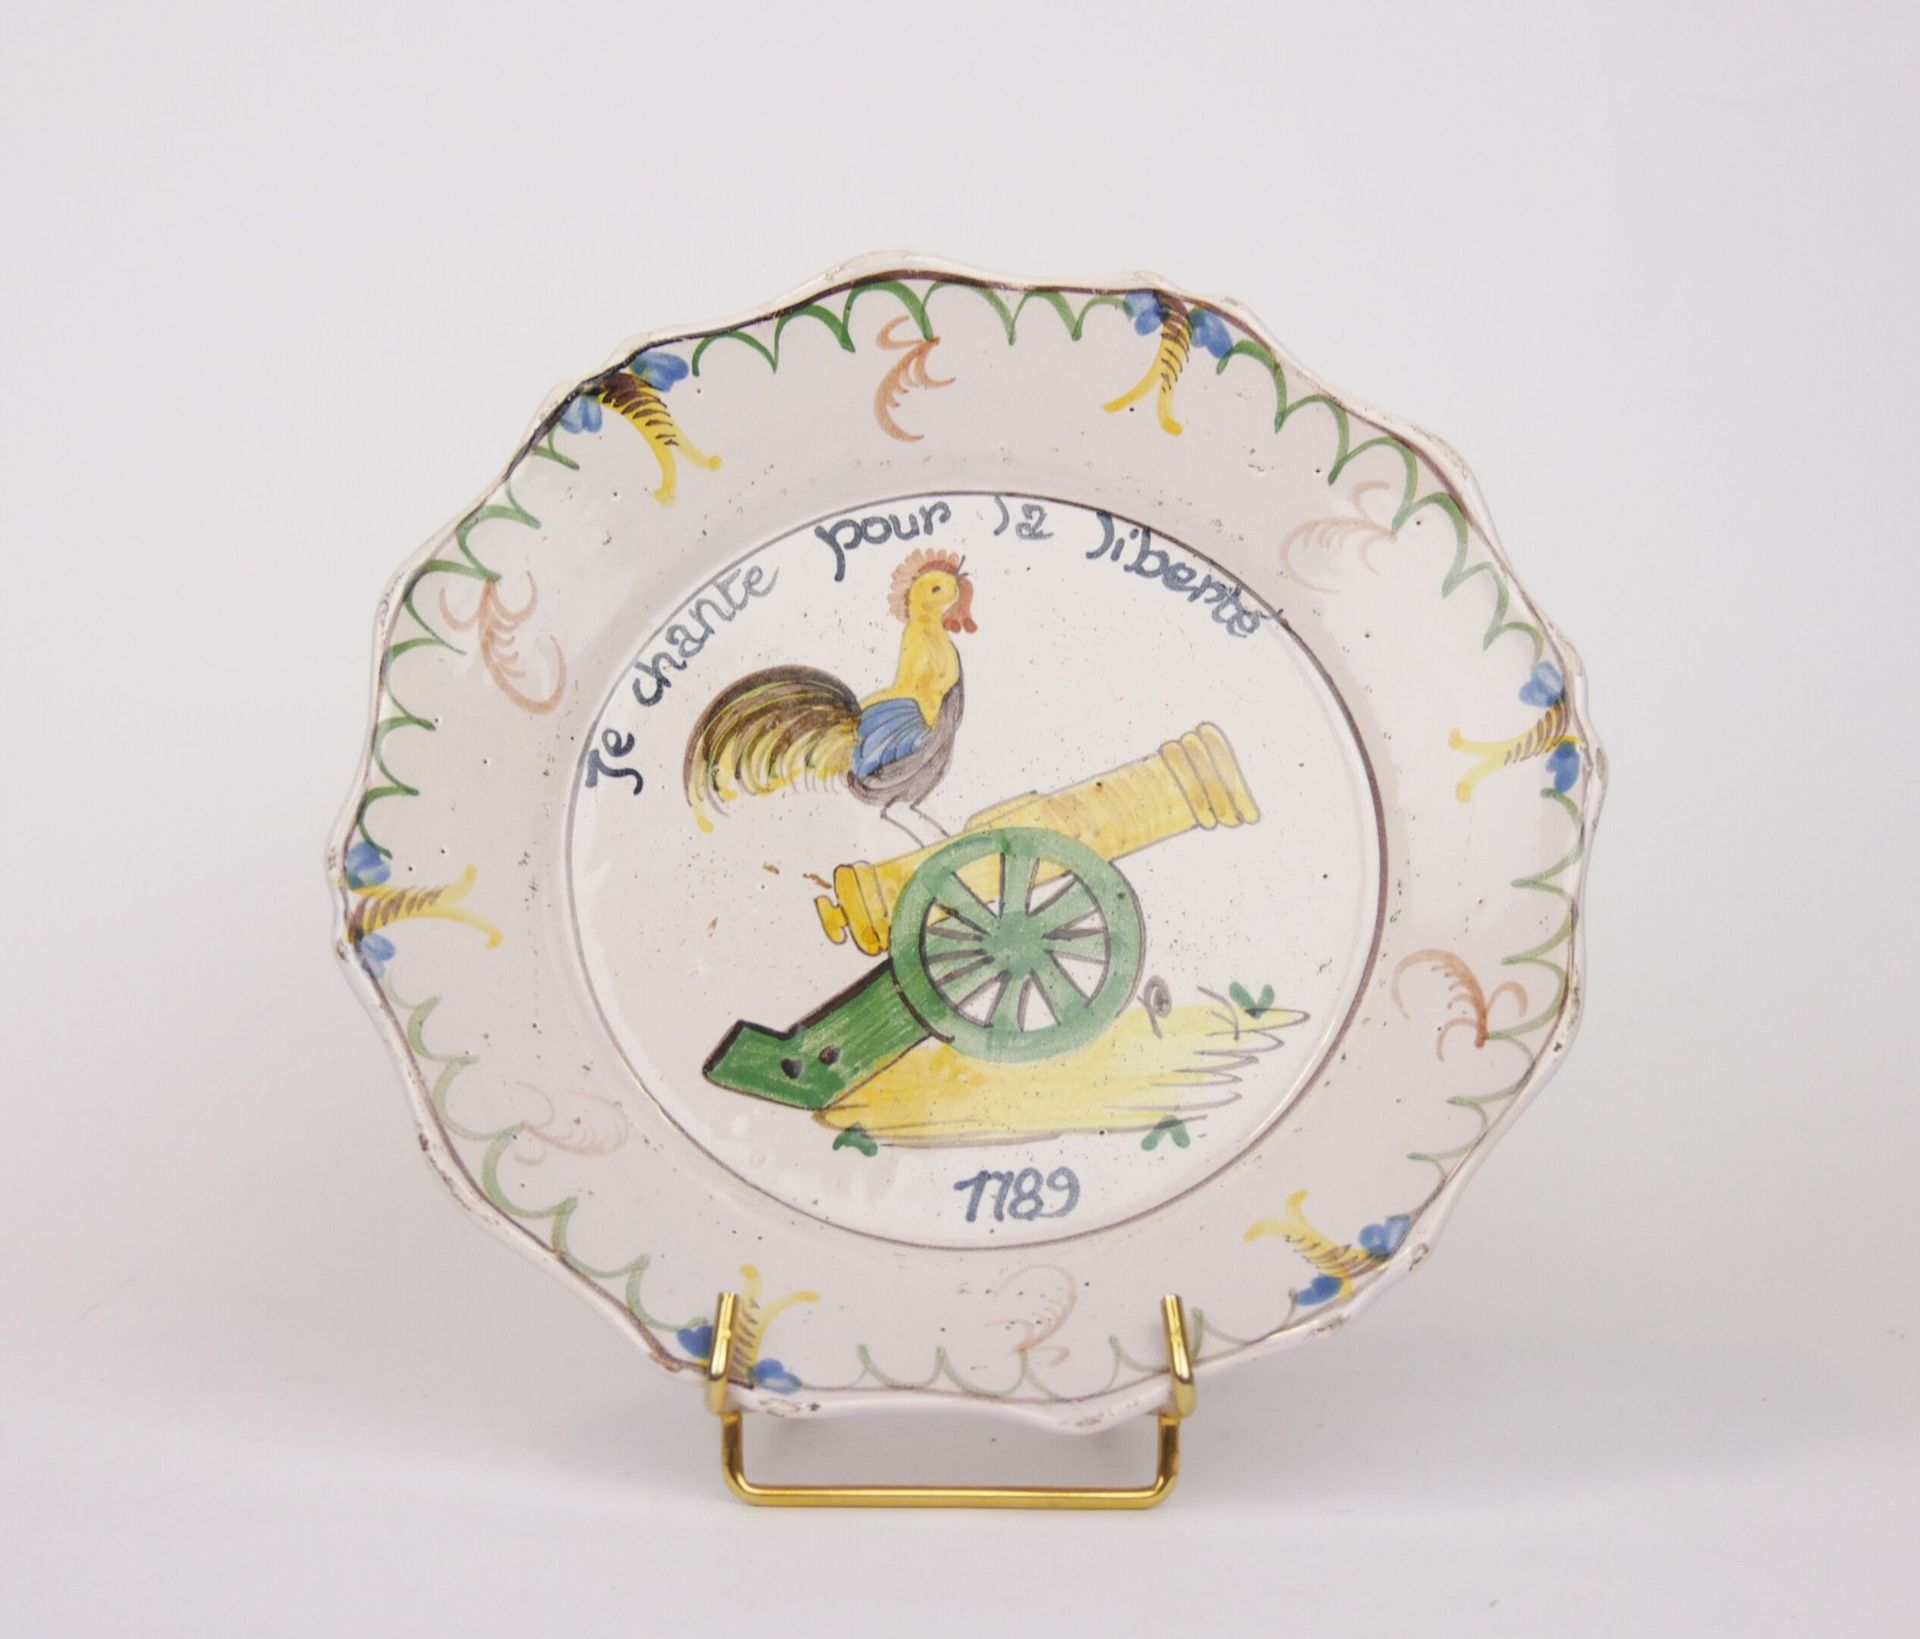 Null NEVERS

Earthenware plate with scalloped wing, with polychrome revolutionar&hellip;